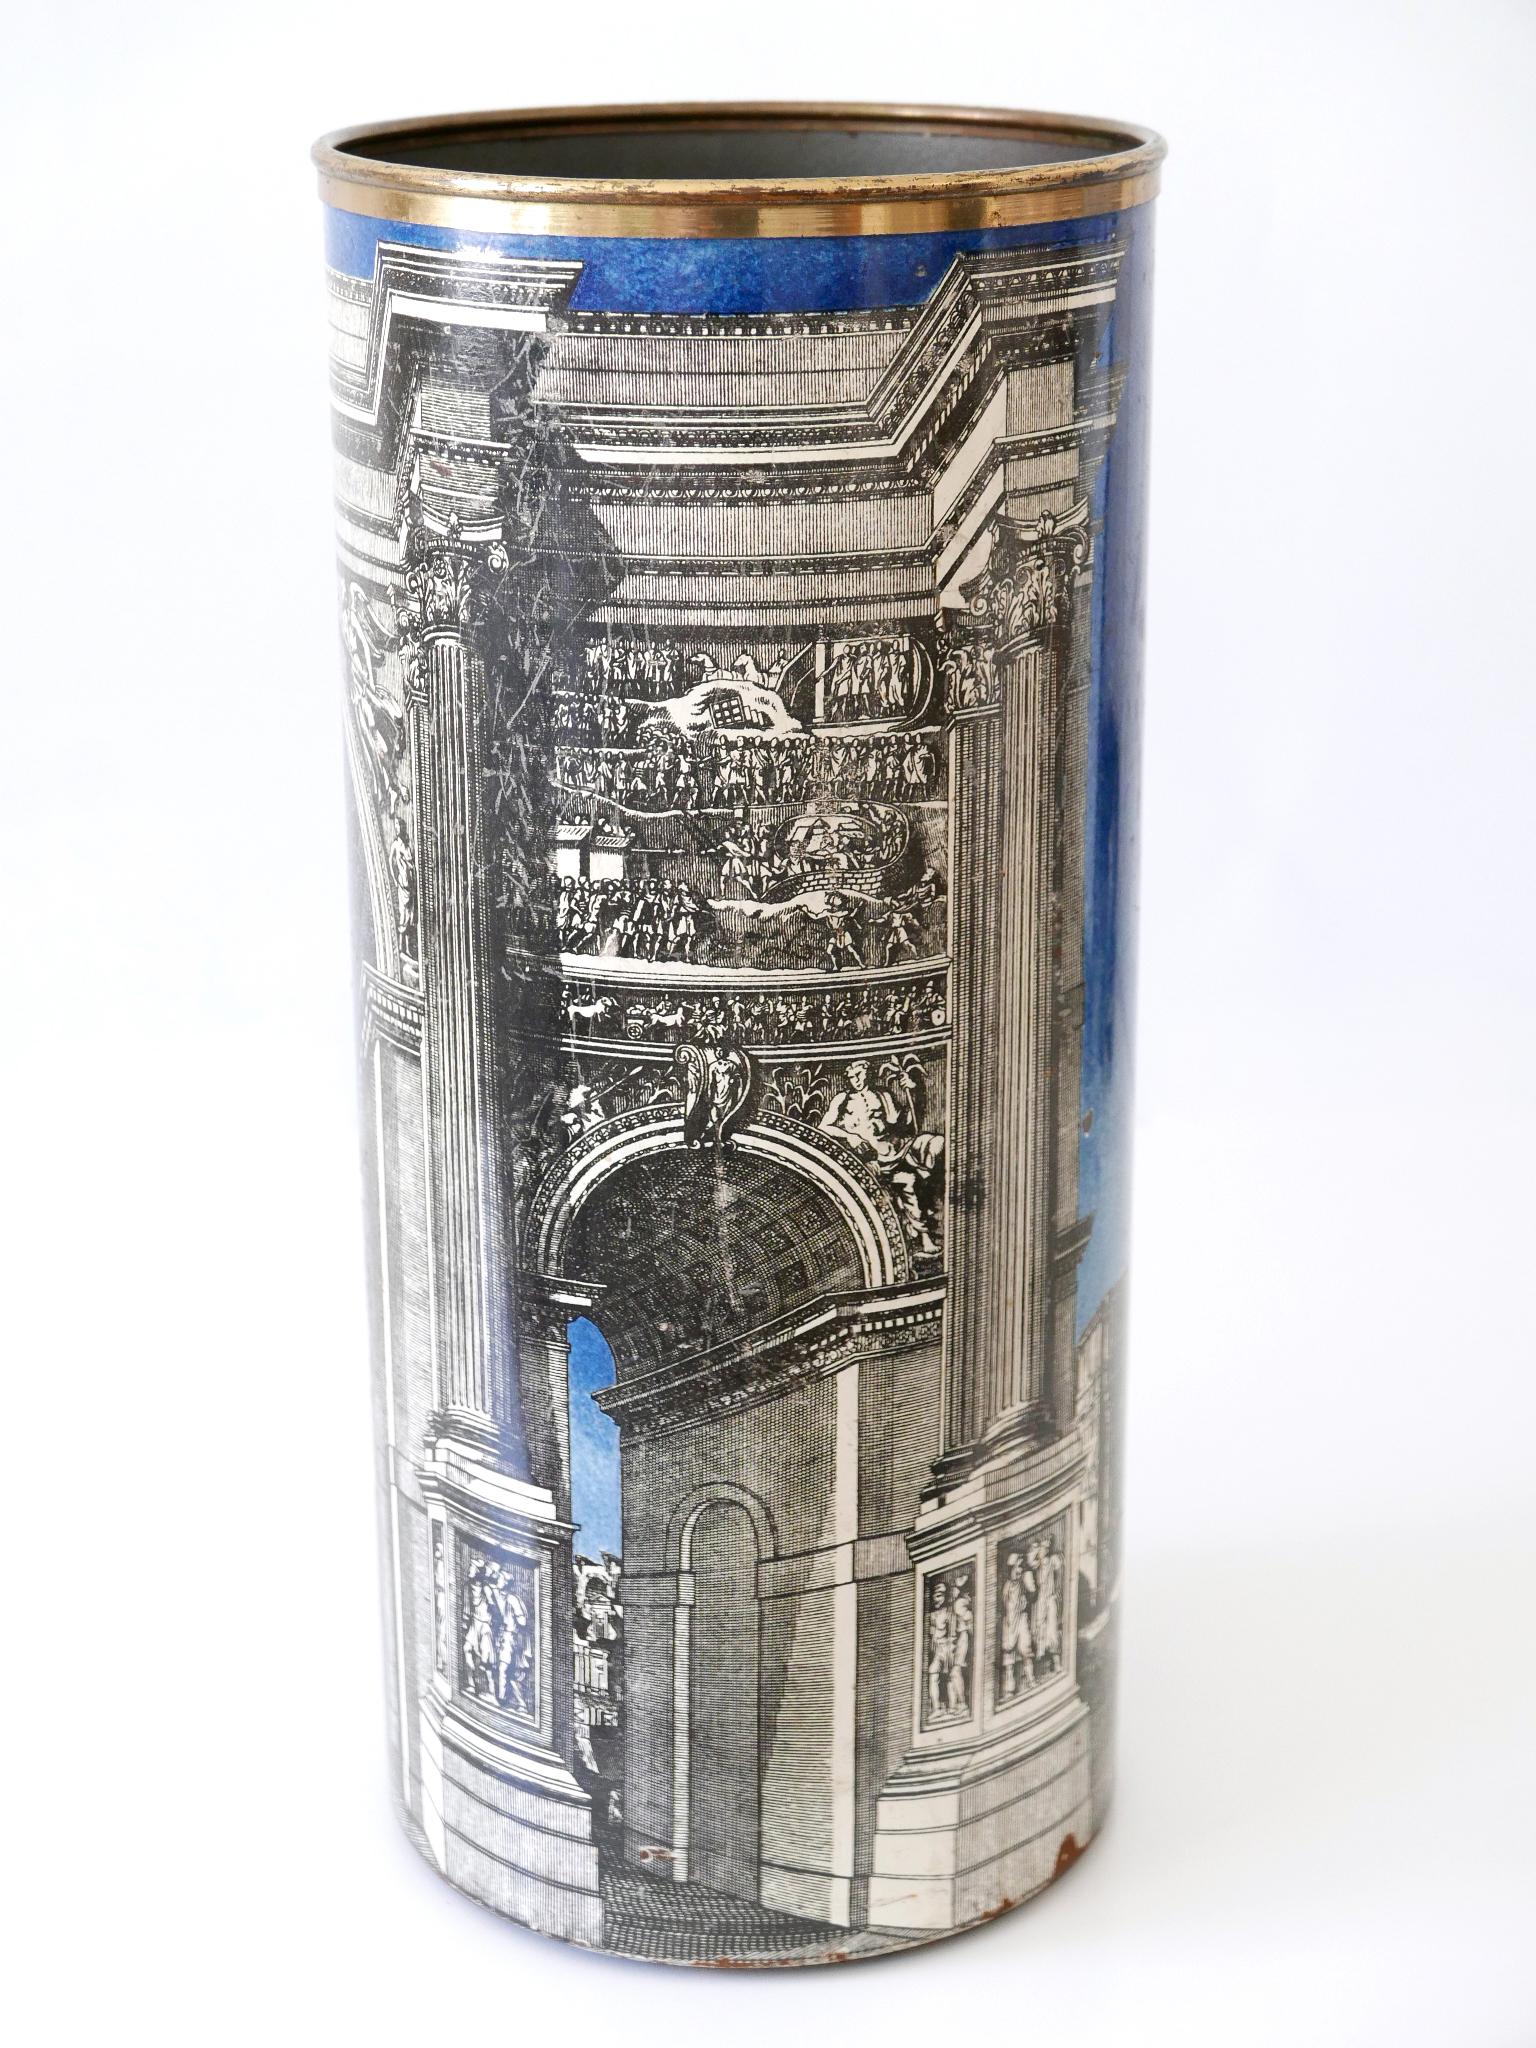 Early Mid-Century Modern 'Roman Arch' Umbrella Stand by Piero Fornasetti 1950s For Sale 2